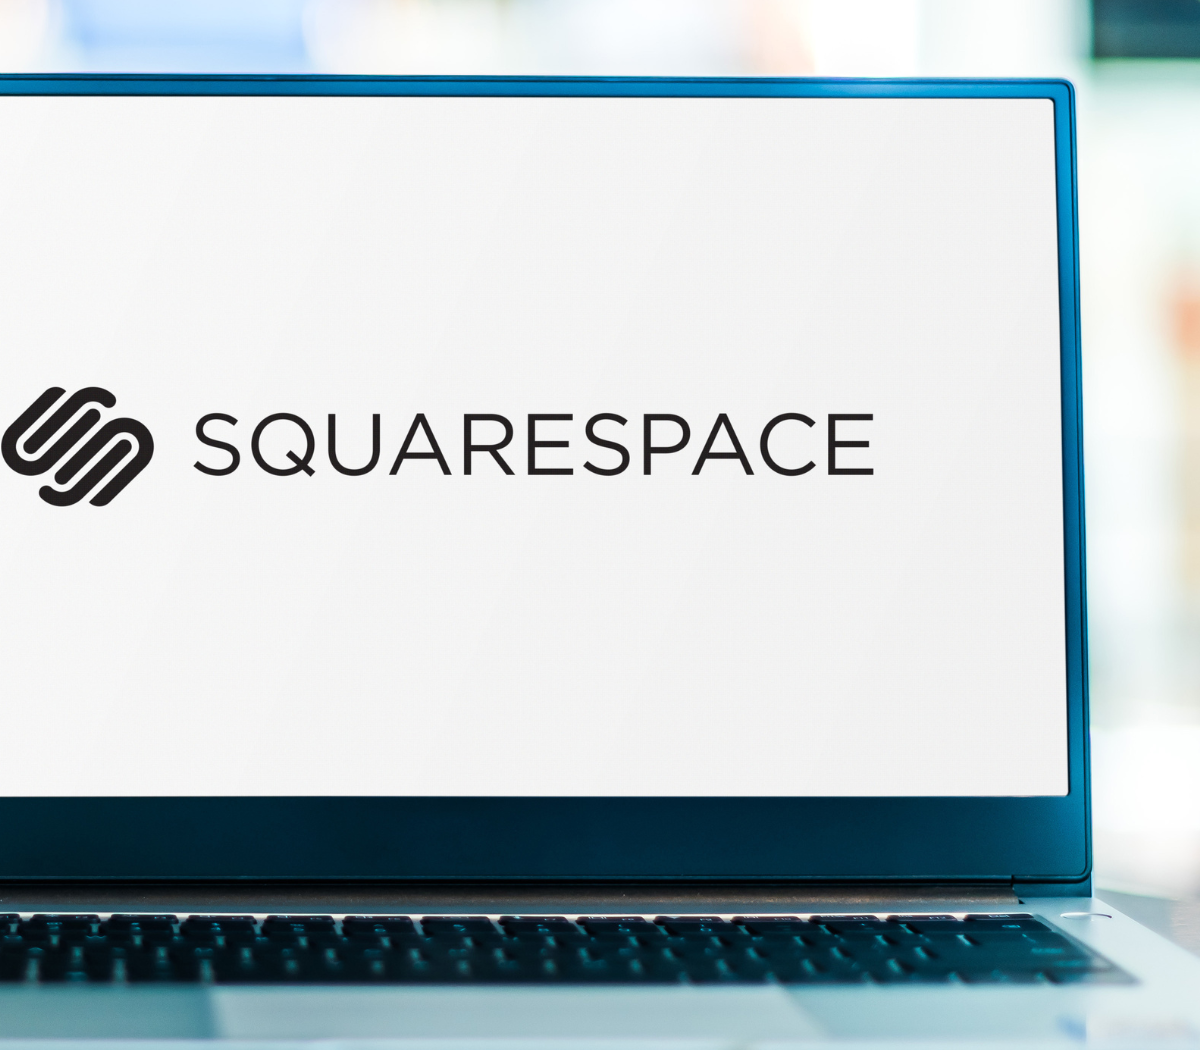 7 Tips to Build a Great Squarespace Website